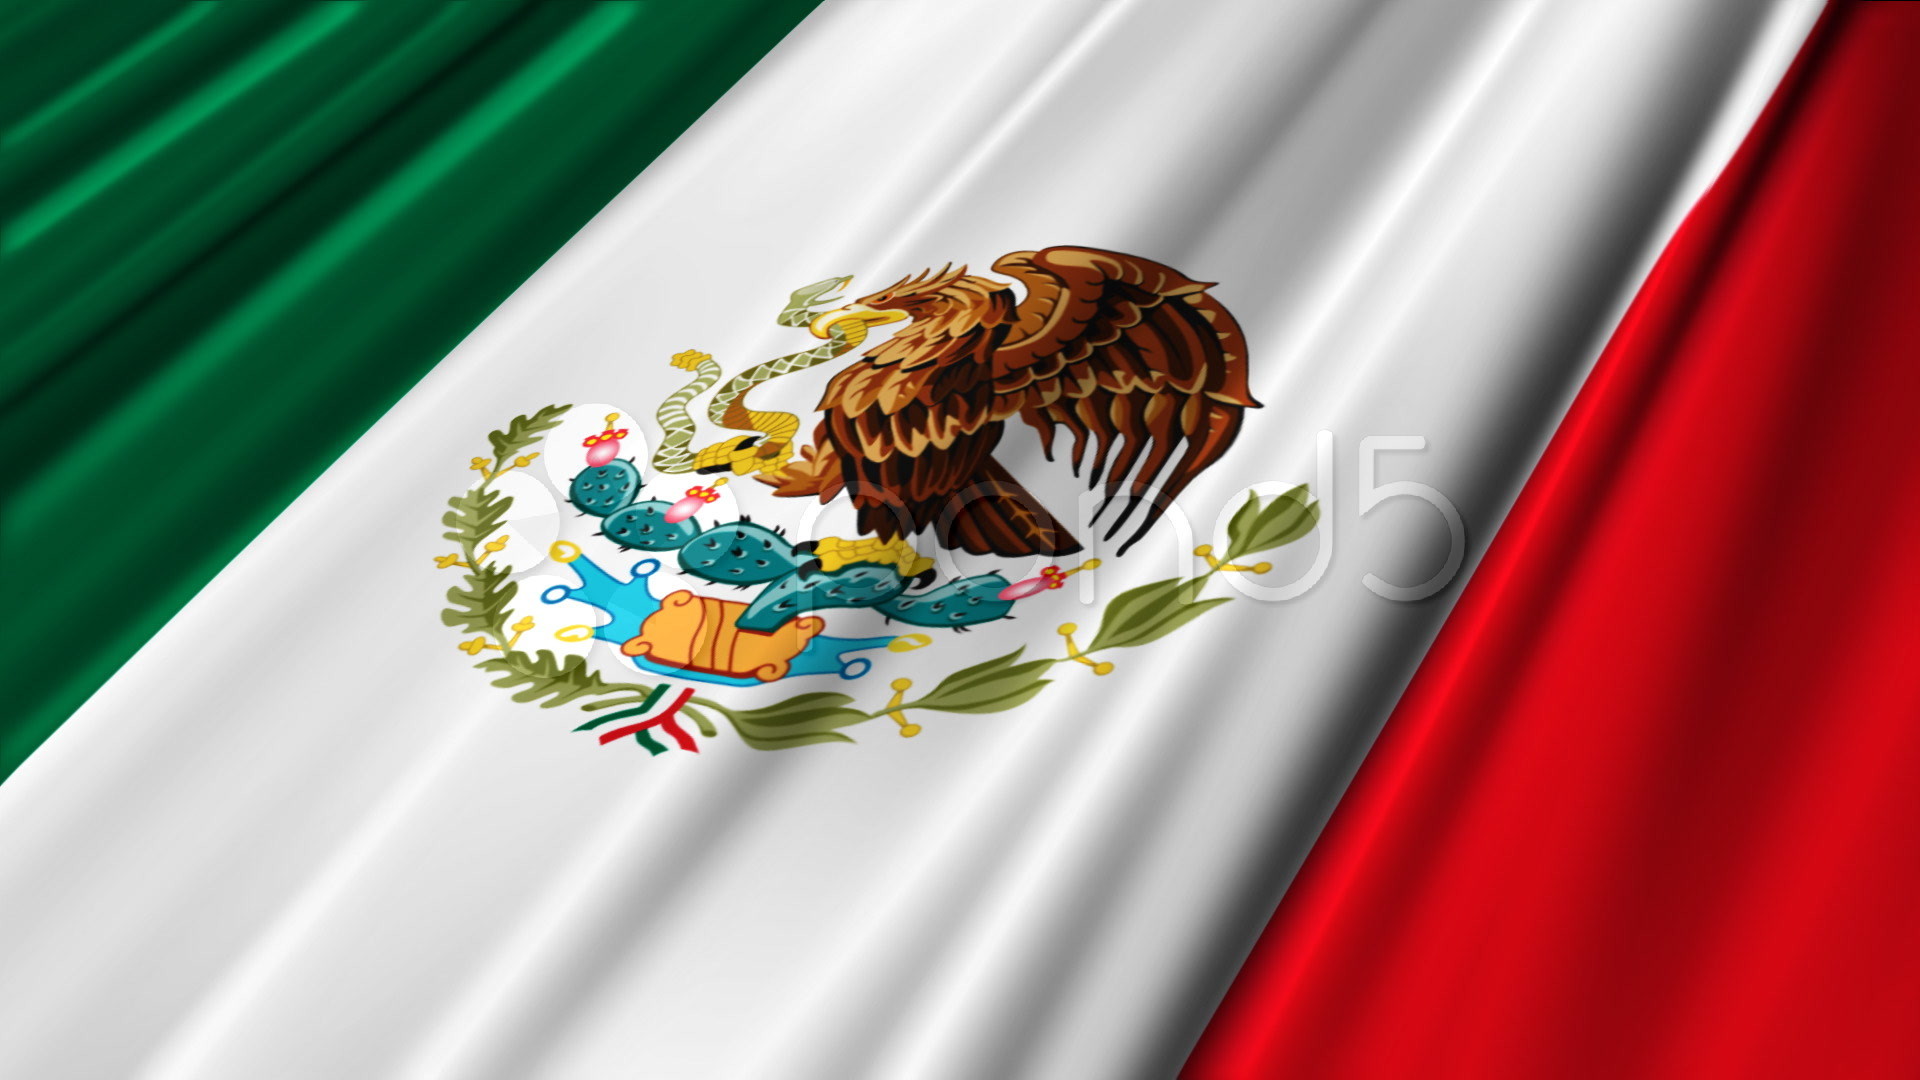 1920x1080  Mexico Wallpapers HD Desktop Backgrounds Images and Pictures